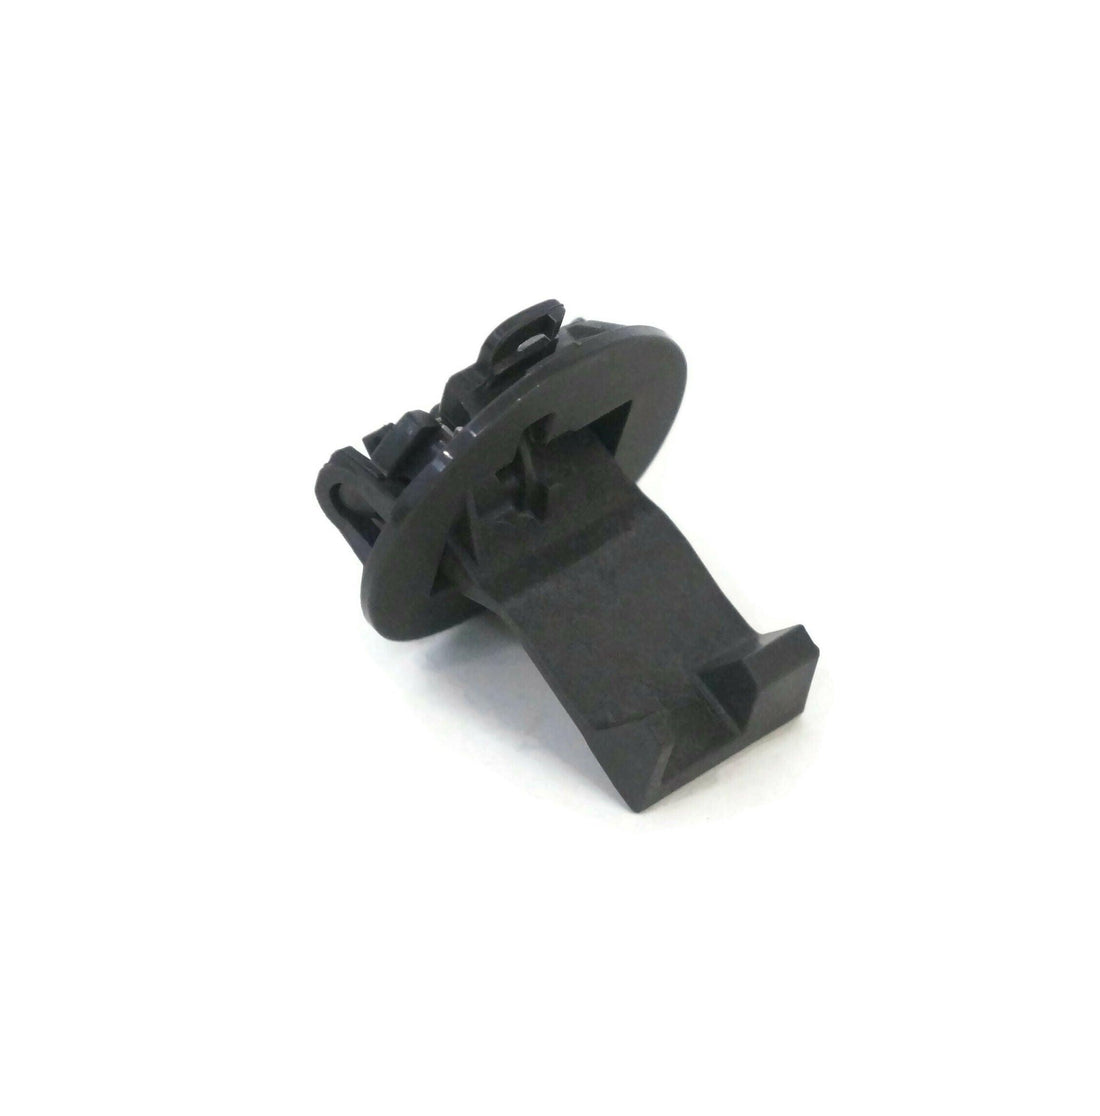 Lid & Door Switches, Latches and Locks - Virginia Service Supply